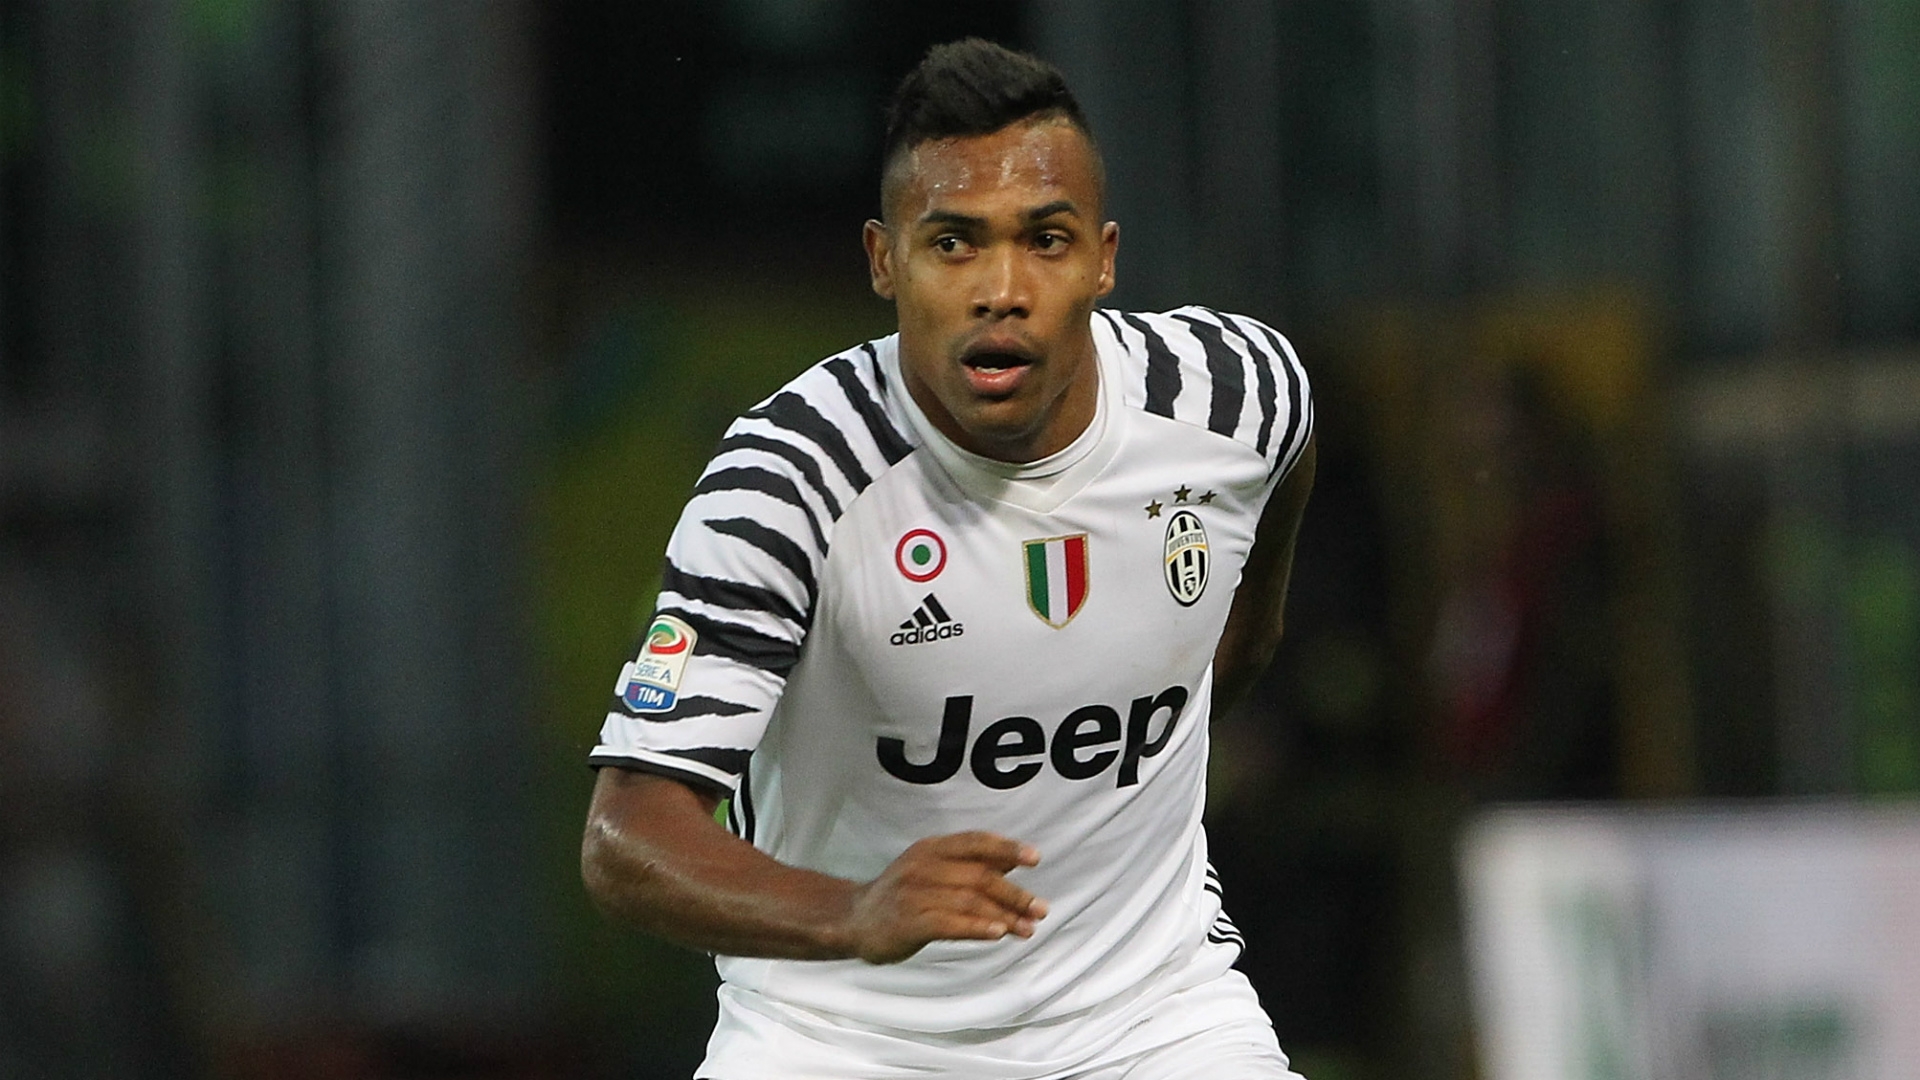 Chelsea's offer for Alex Sandro was rejected by Juventus